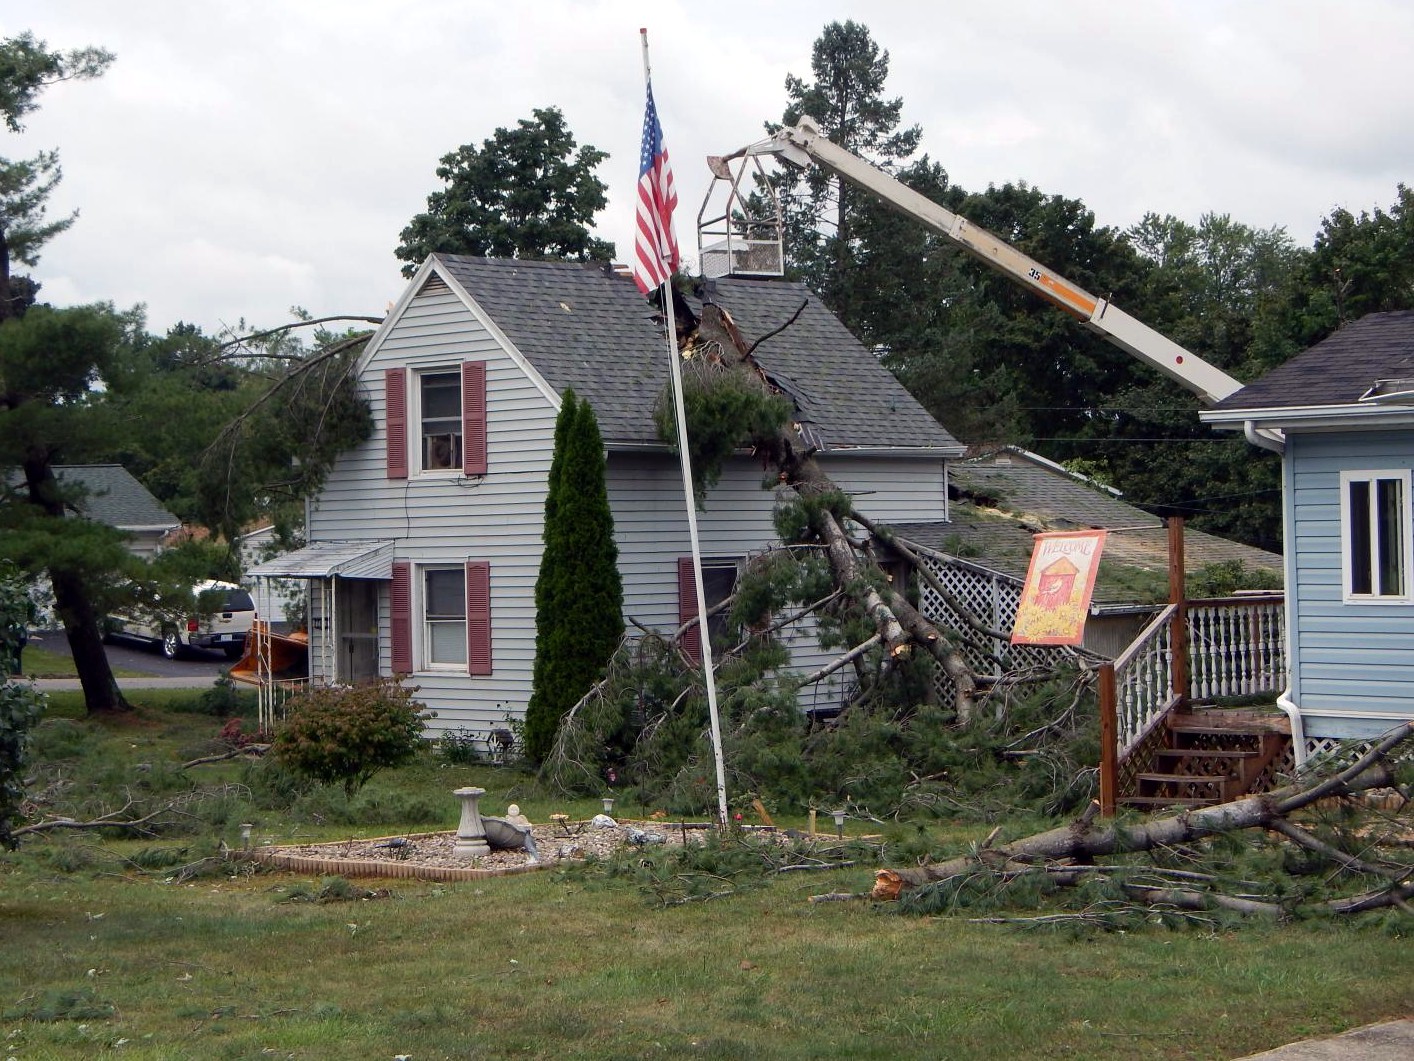 Wind damage can be severe, especially in residential areas with lots of trees, as shown in this undated photo.